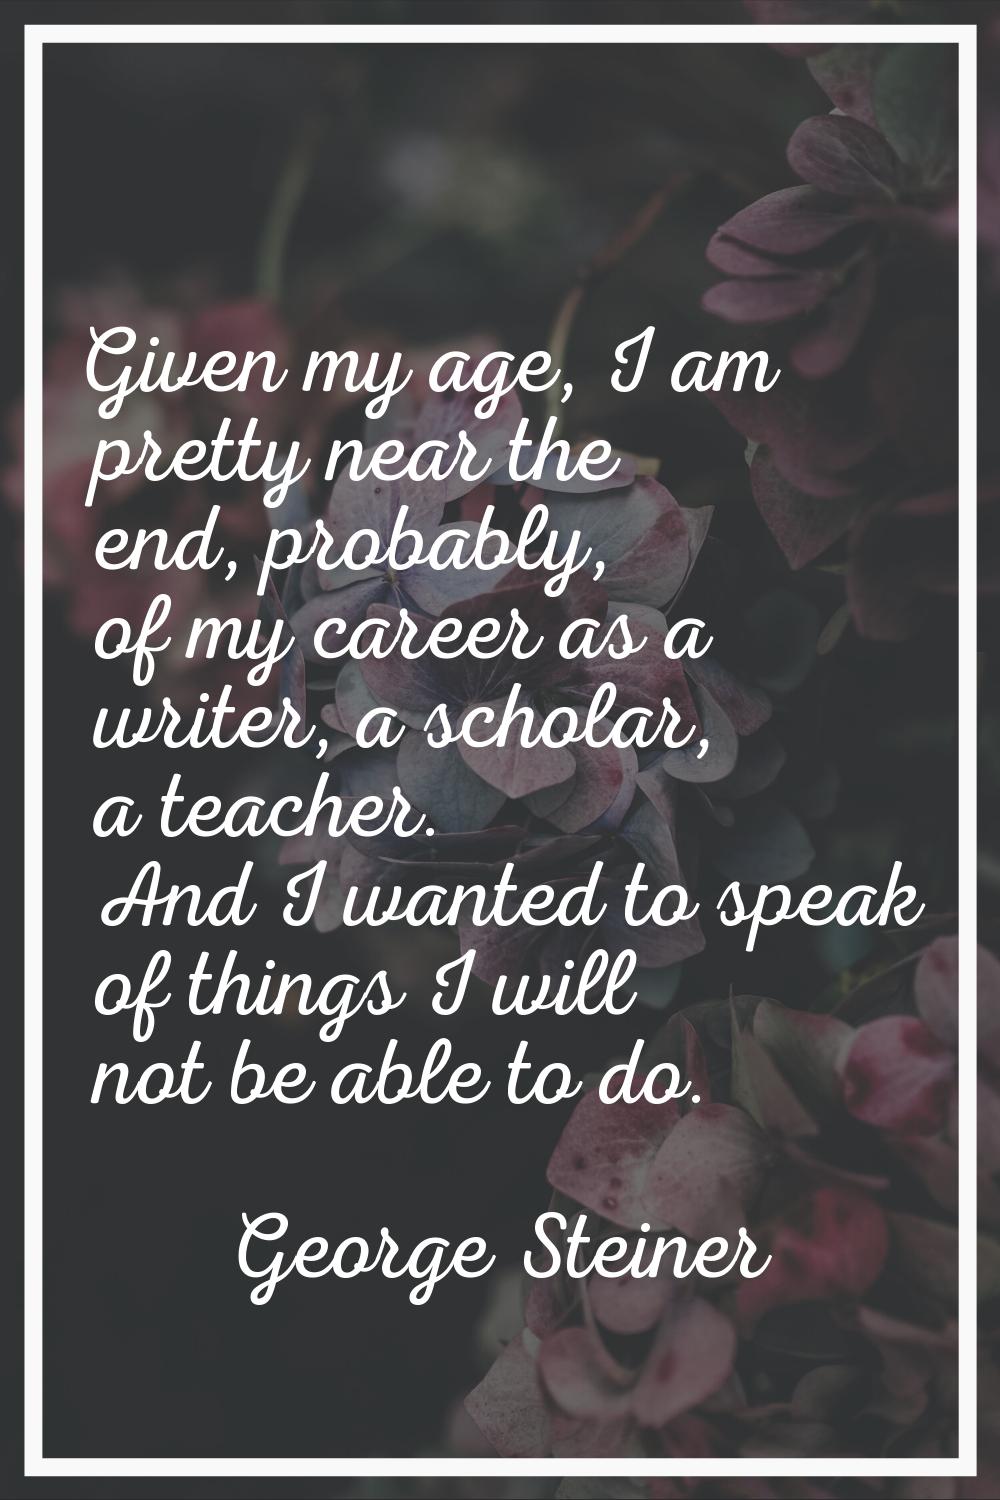 Given my age, I am pretty near the end, probably, of my career as a writer, a scholar, a teacher. A